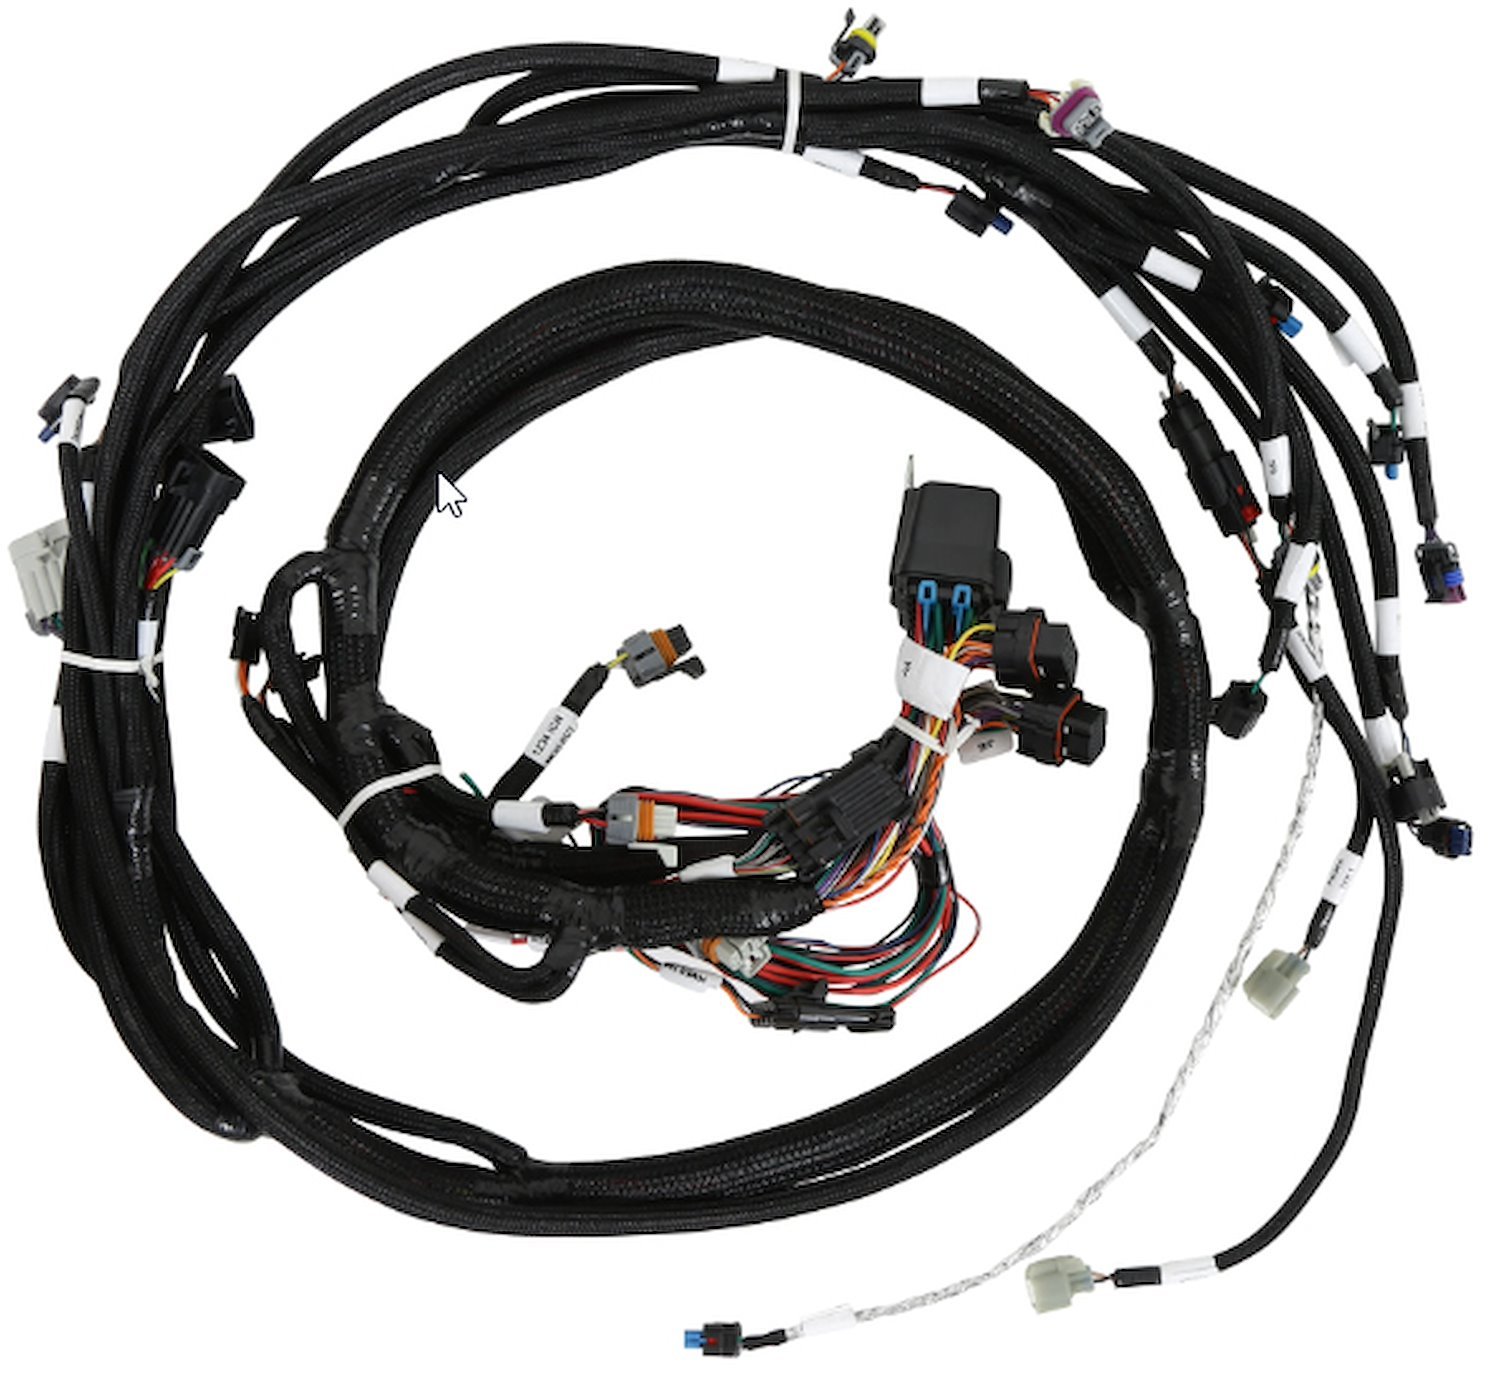 558-140 Main Harness for Ford 7.3L Godzilla Engines w/OE Stock Coils